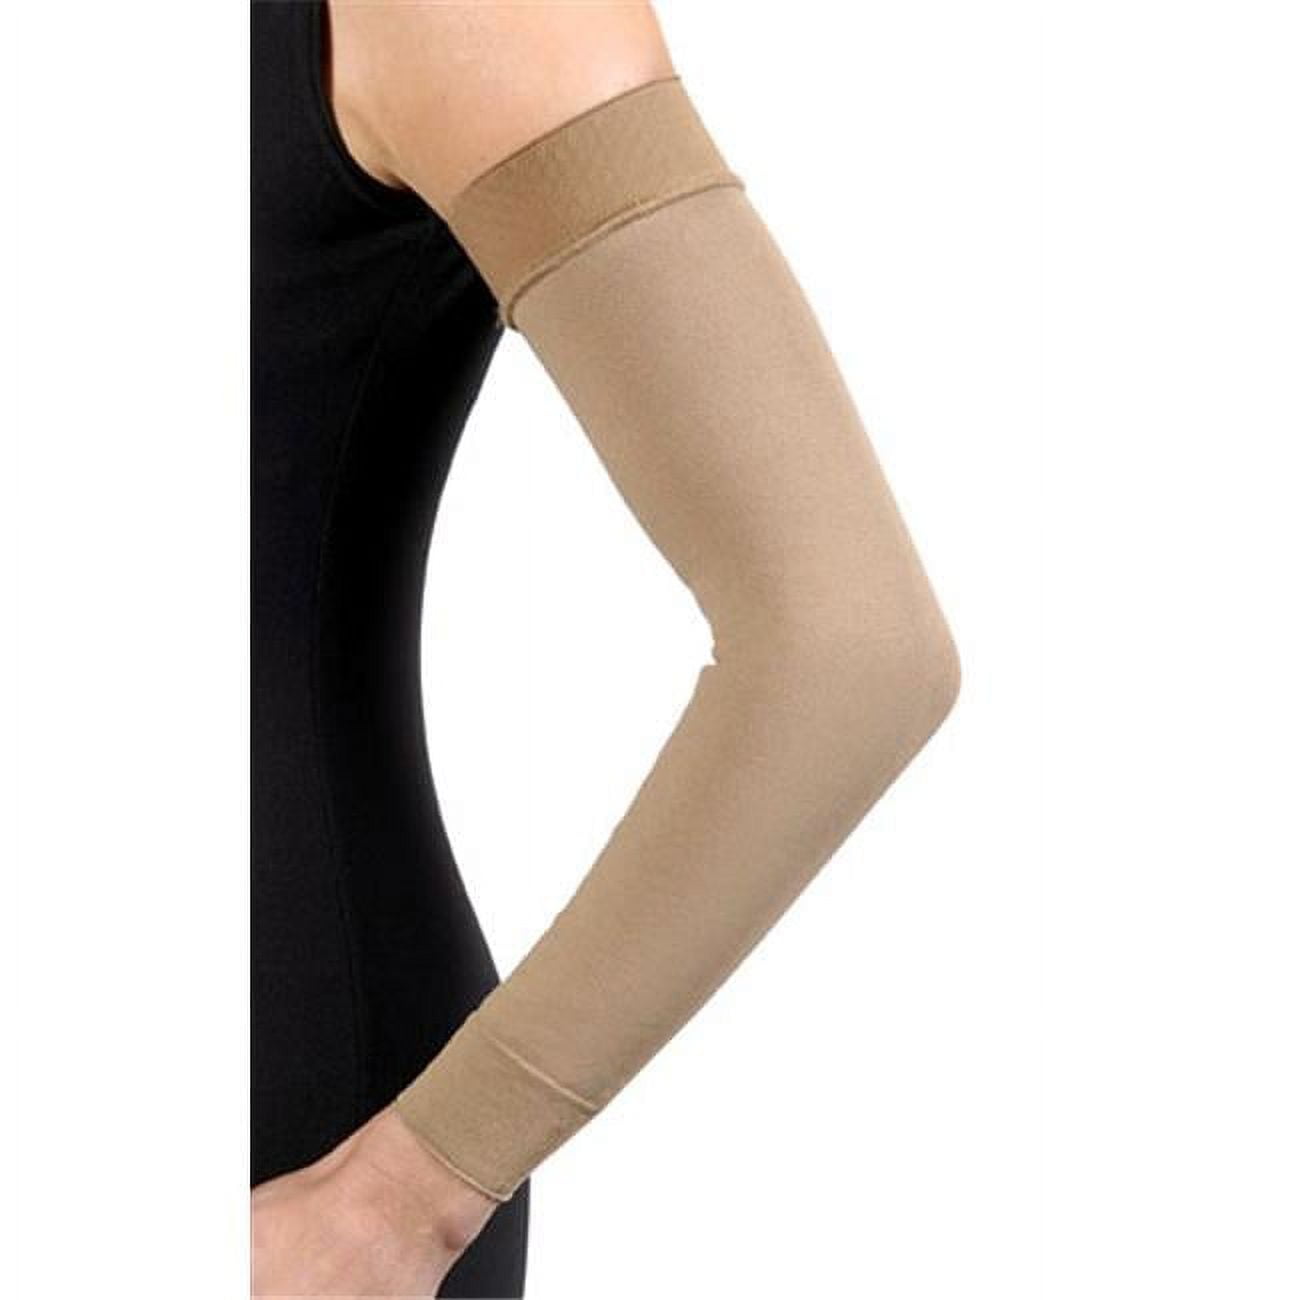 Jobst Bella Strong Lymphedema Armsleeve w/Silicone Band - 30-40mmHg Long  Natural 5